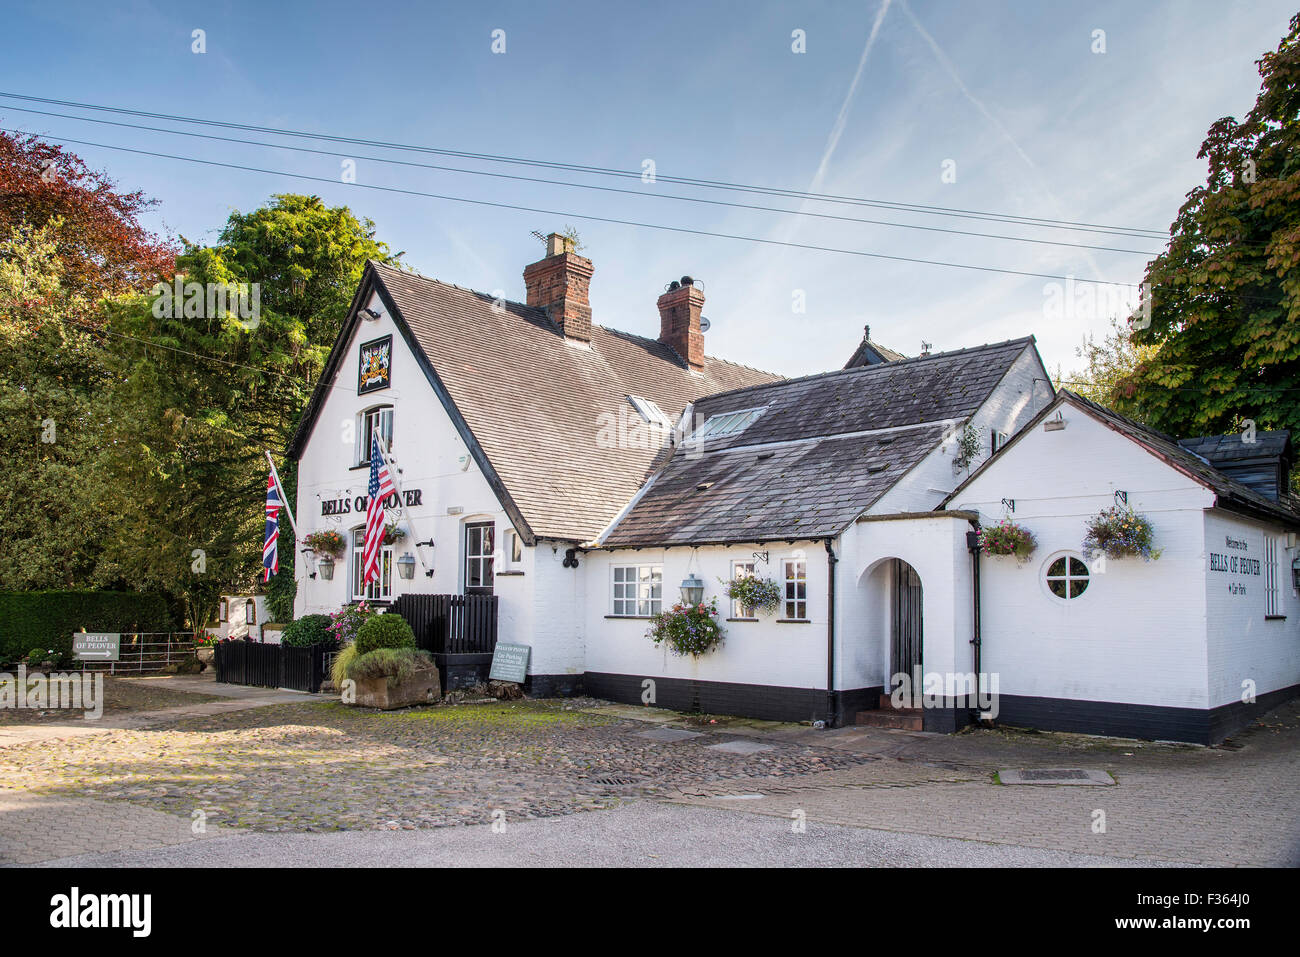 The Bells of Peover public house and country restaurant Lower Peover Cheshire North West England. Stock Photo